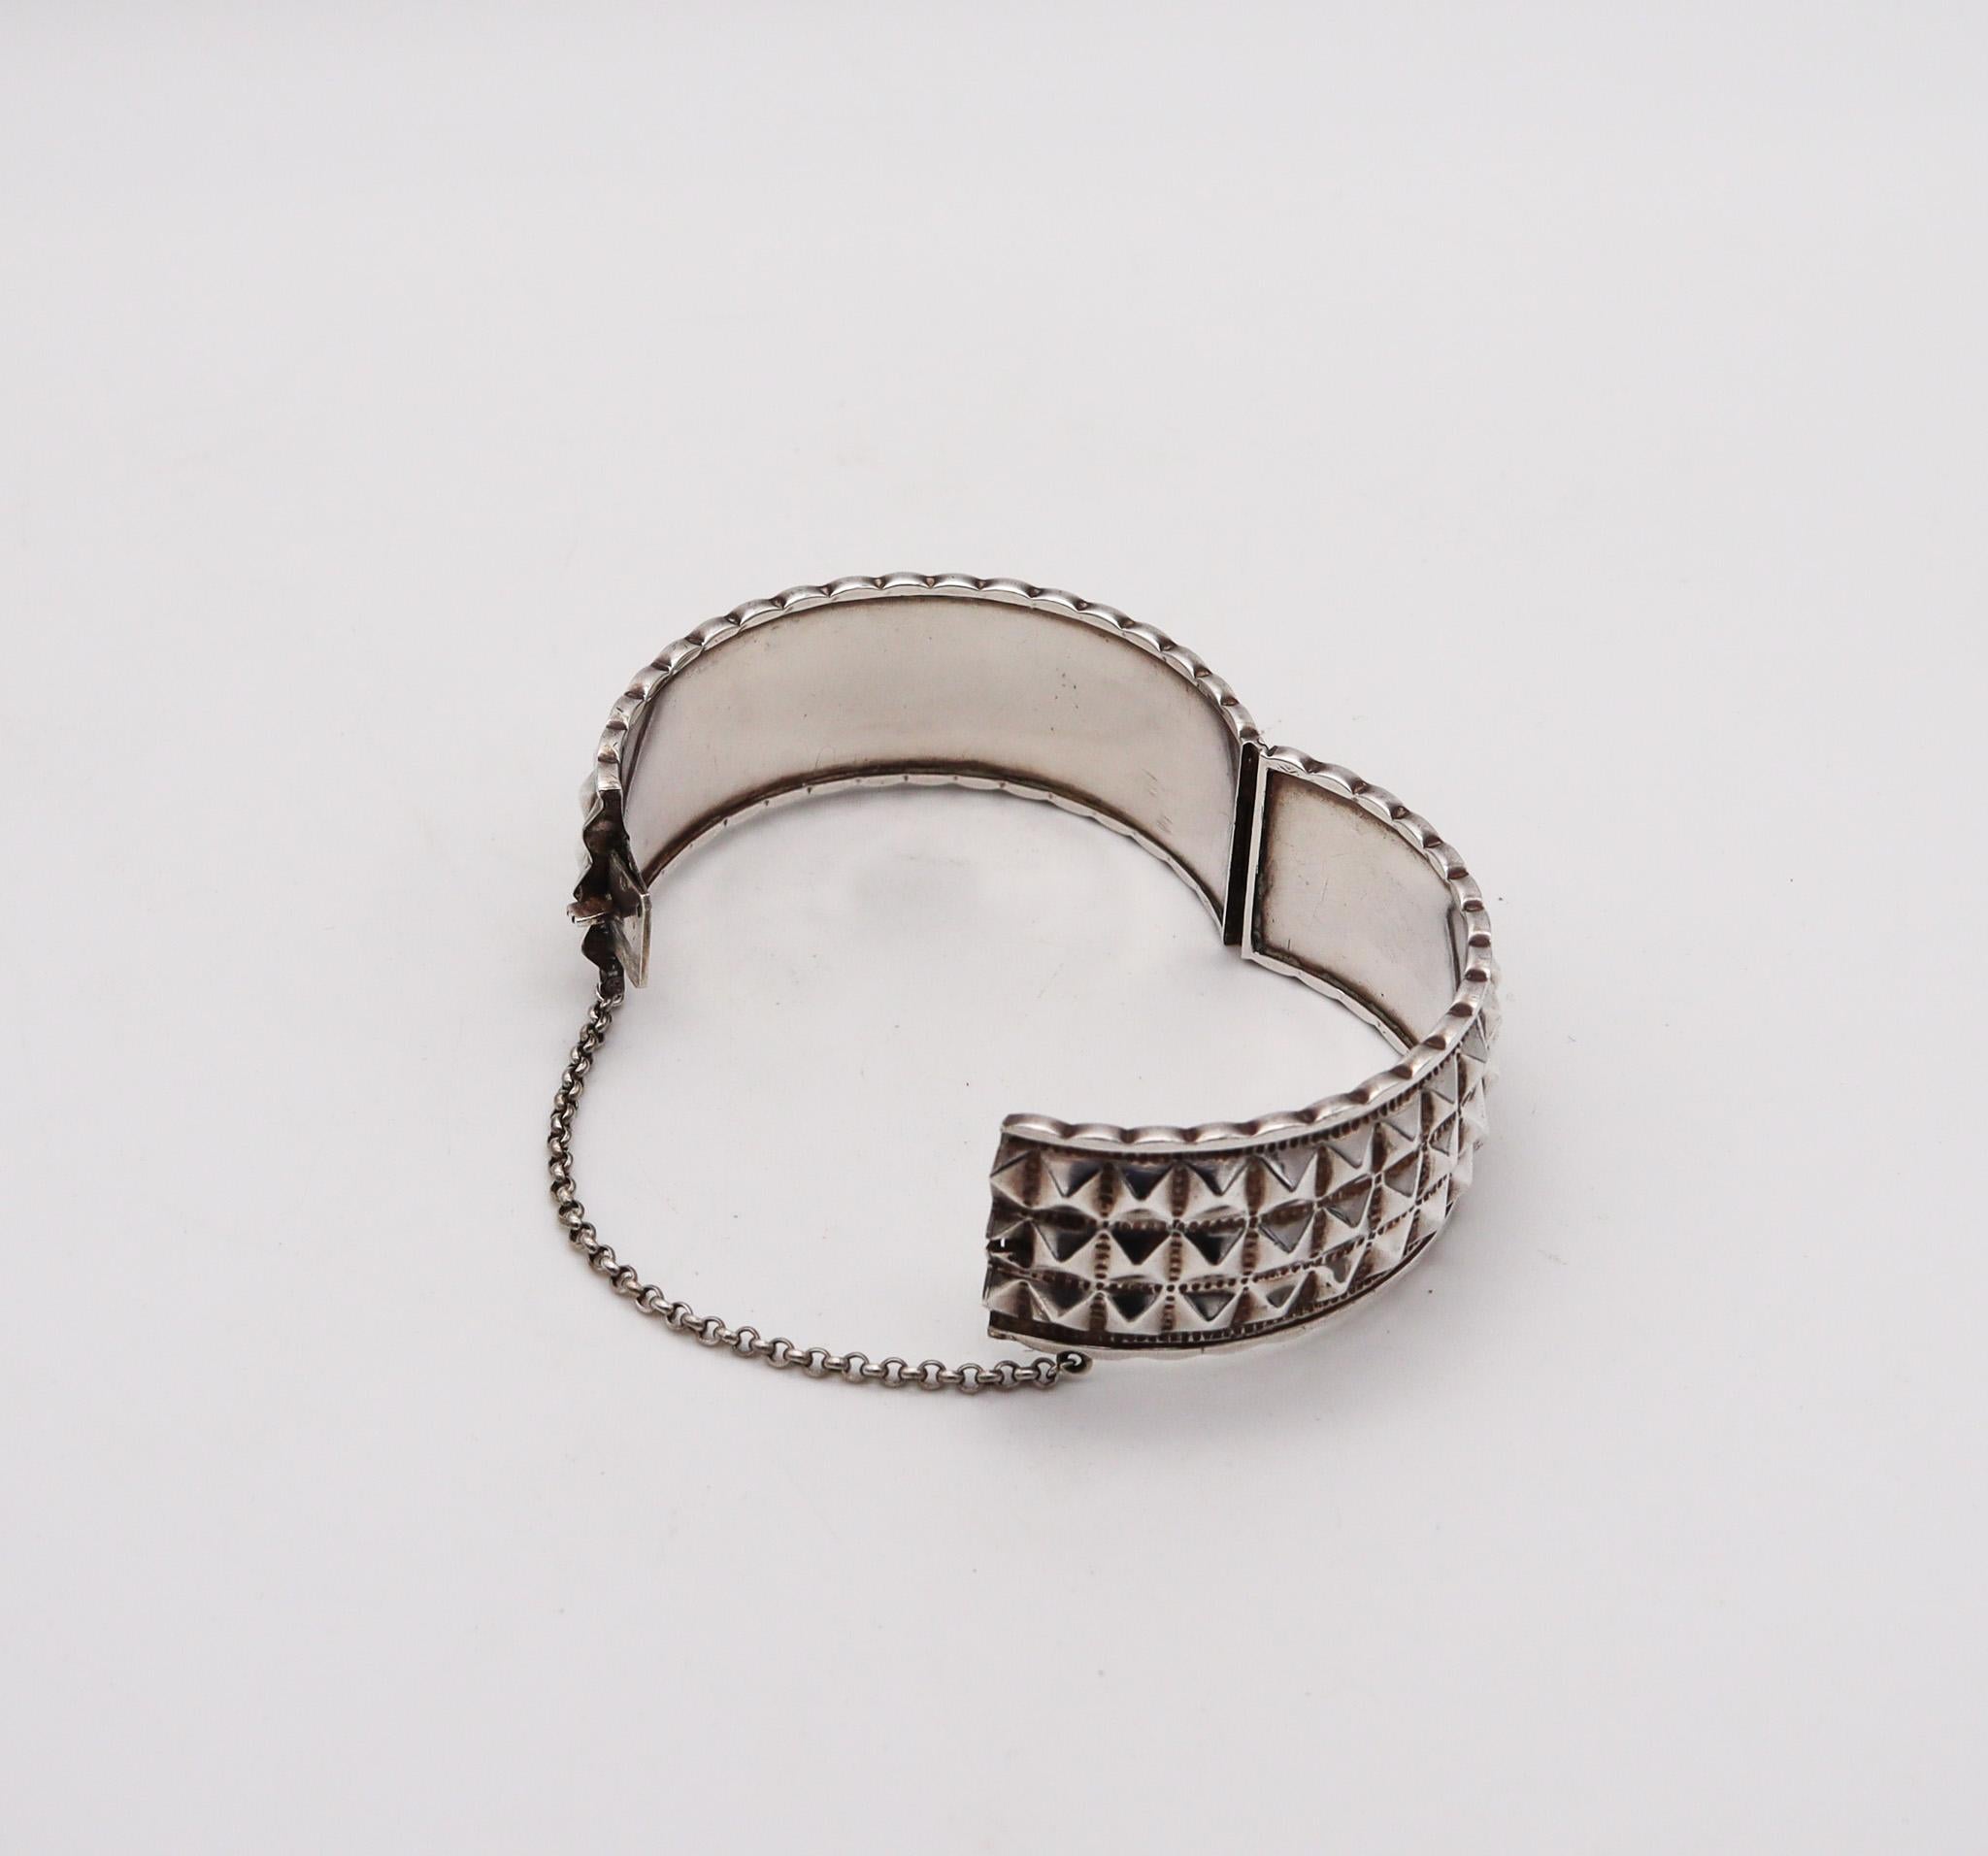 Rene Sitoleux 1935 Paris French Art Deco Geometric Bangle Bracelet In 800 Silver For Sale 1